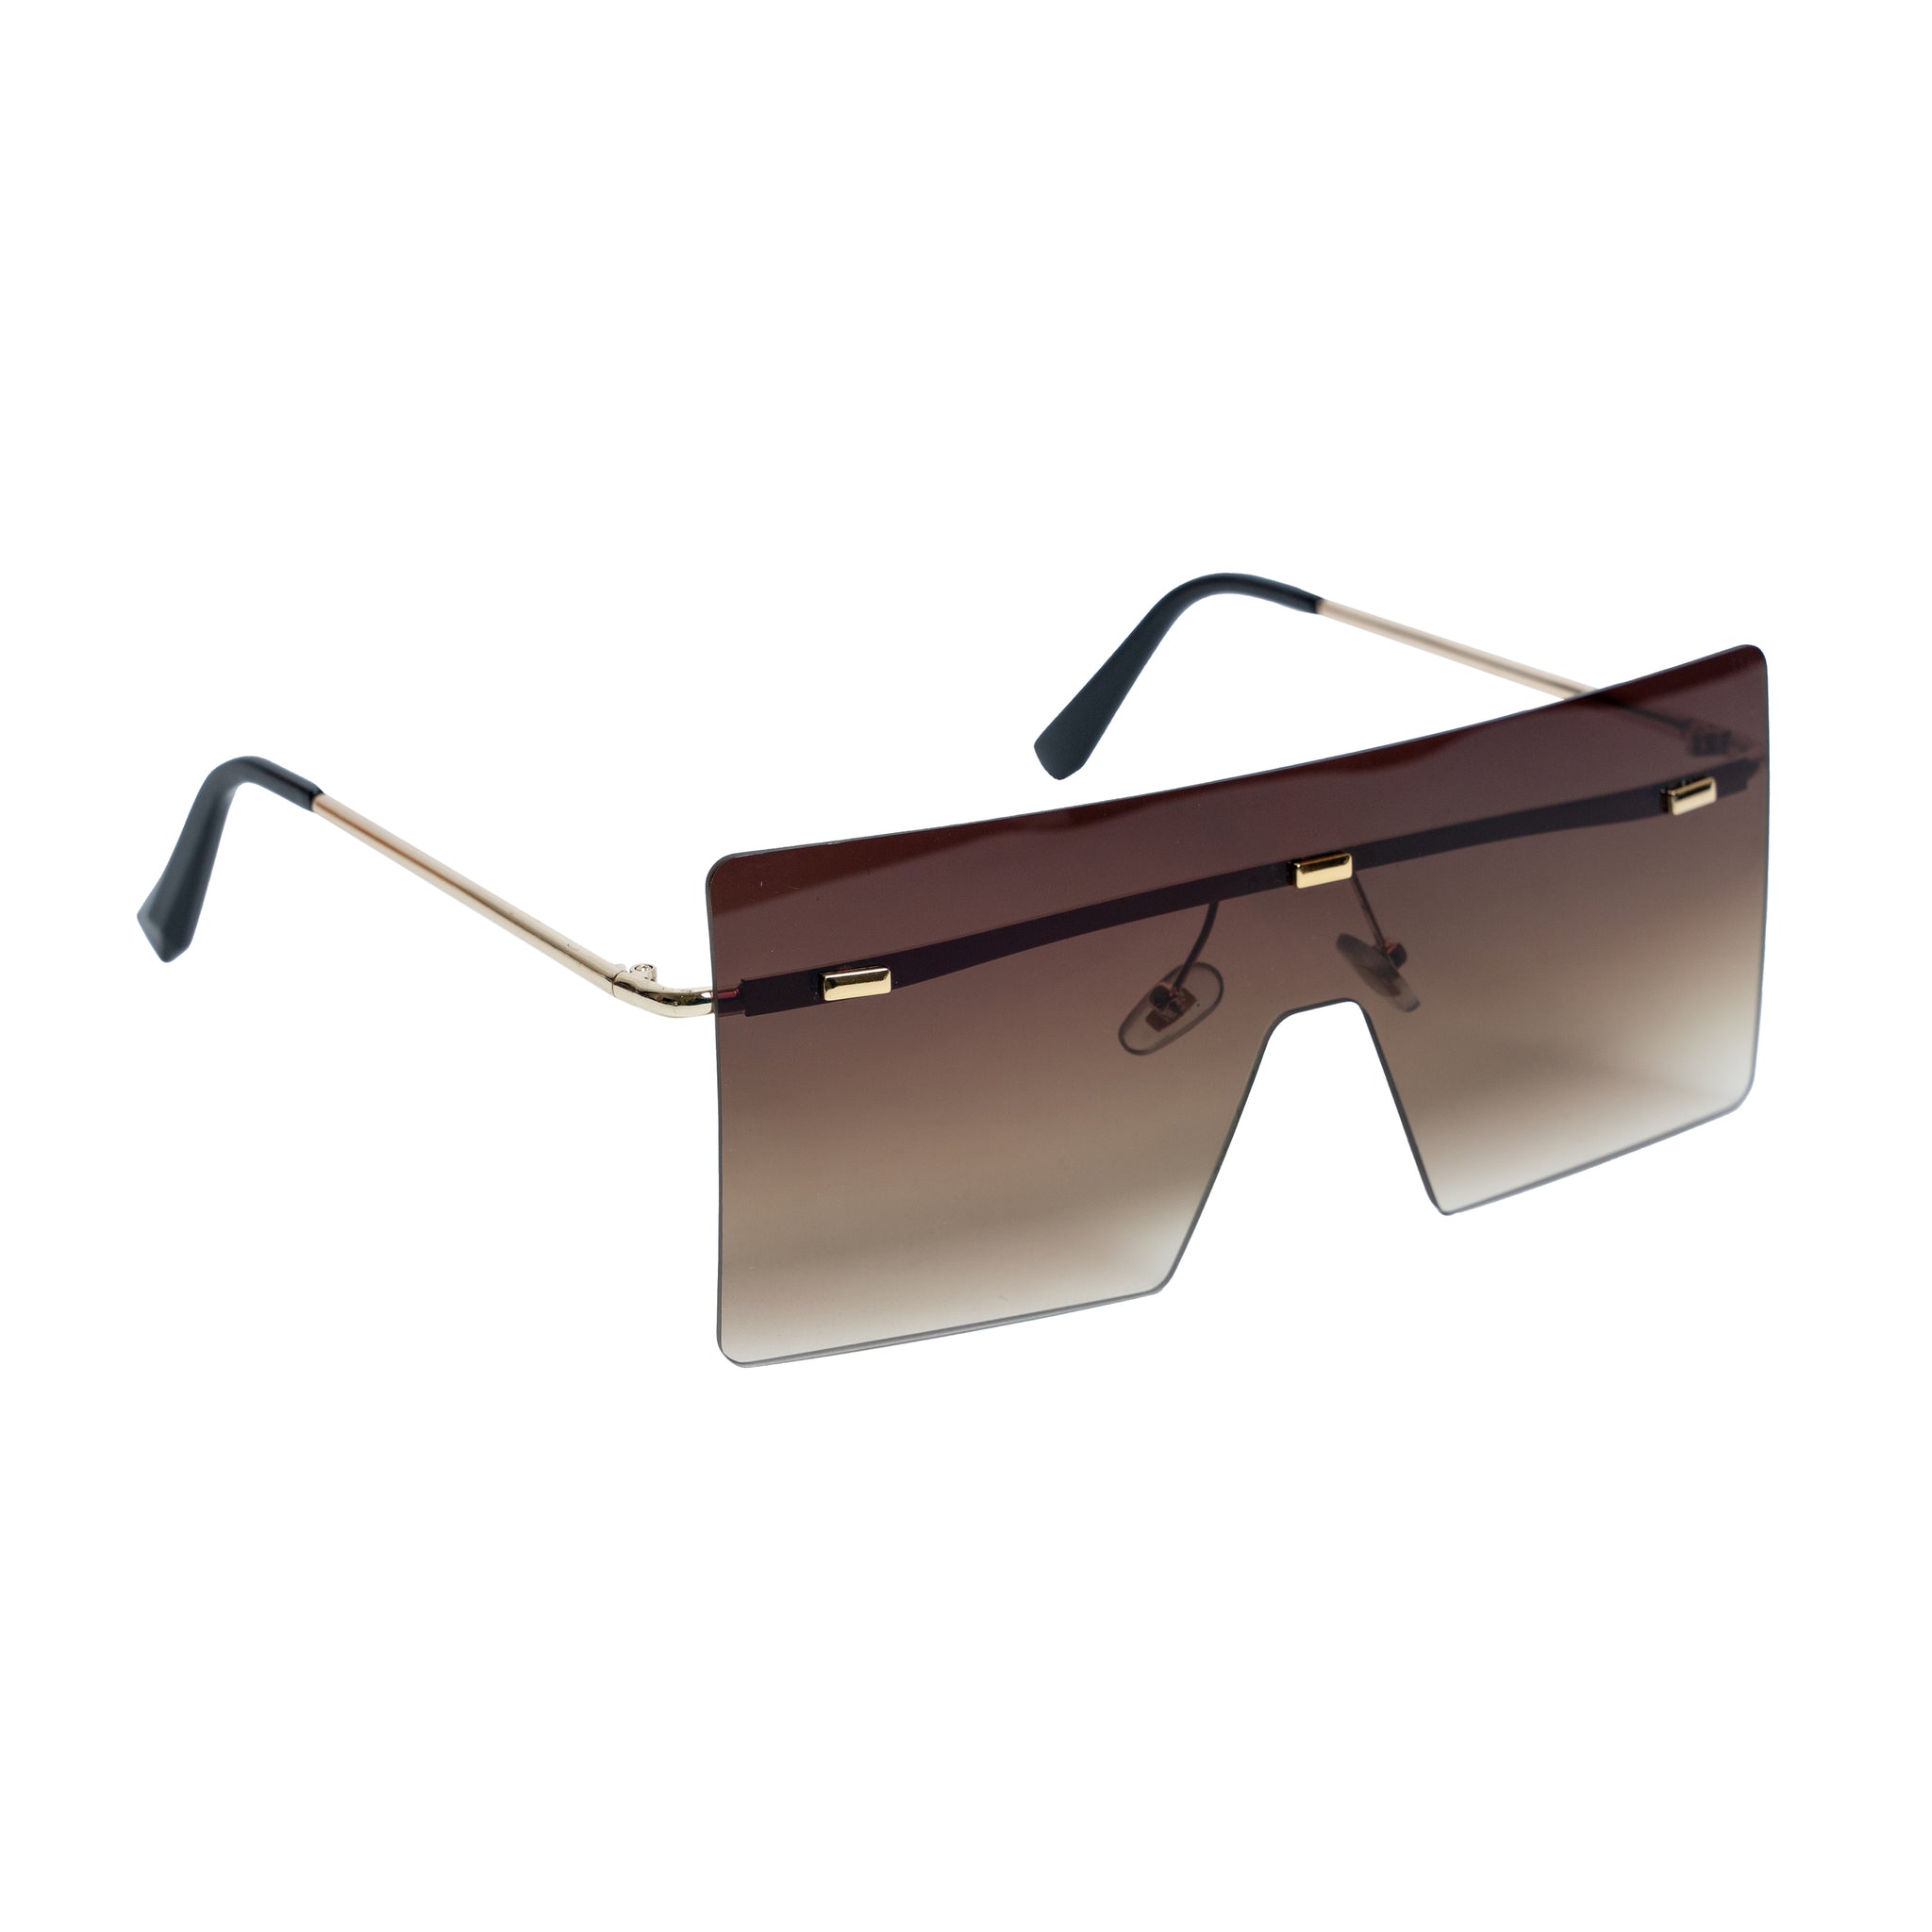 Chokore Rimless Oversized Sunglasses with UV 400 Protection (Brown)